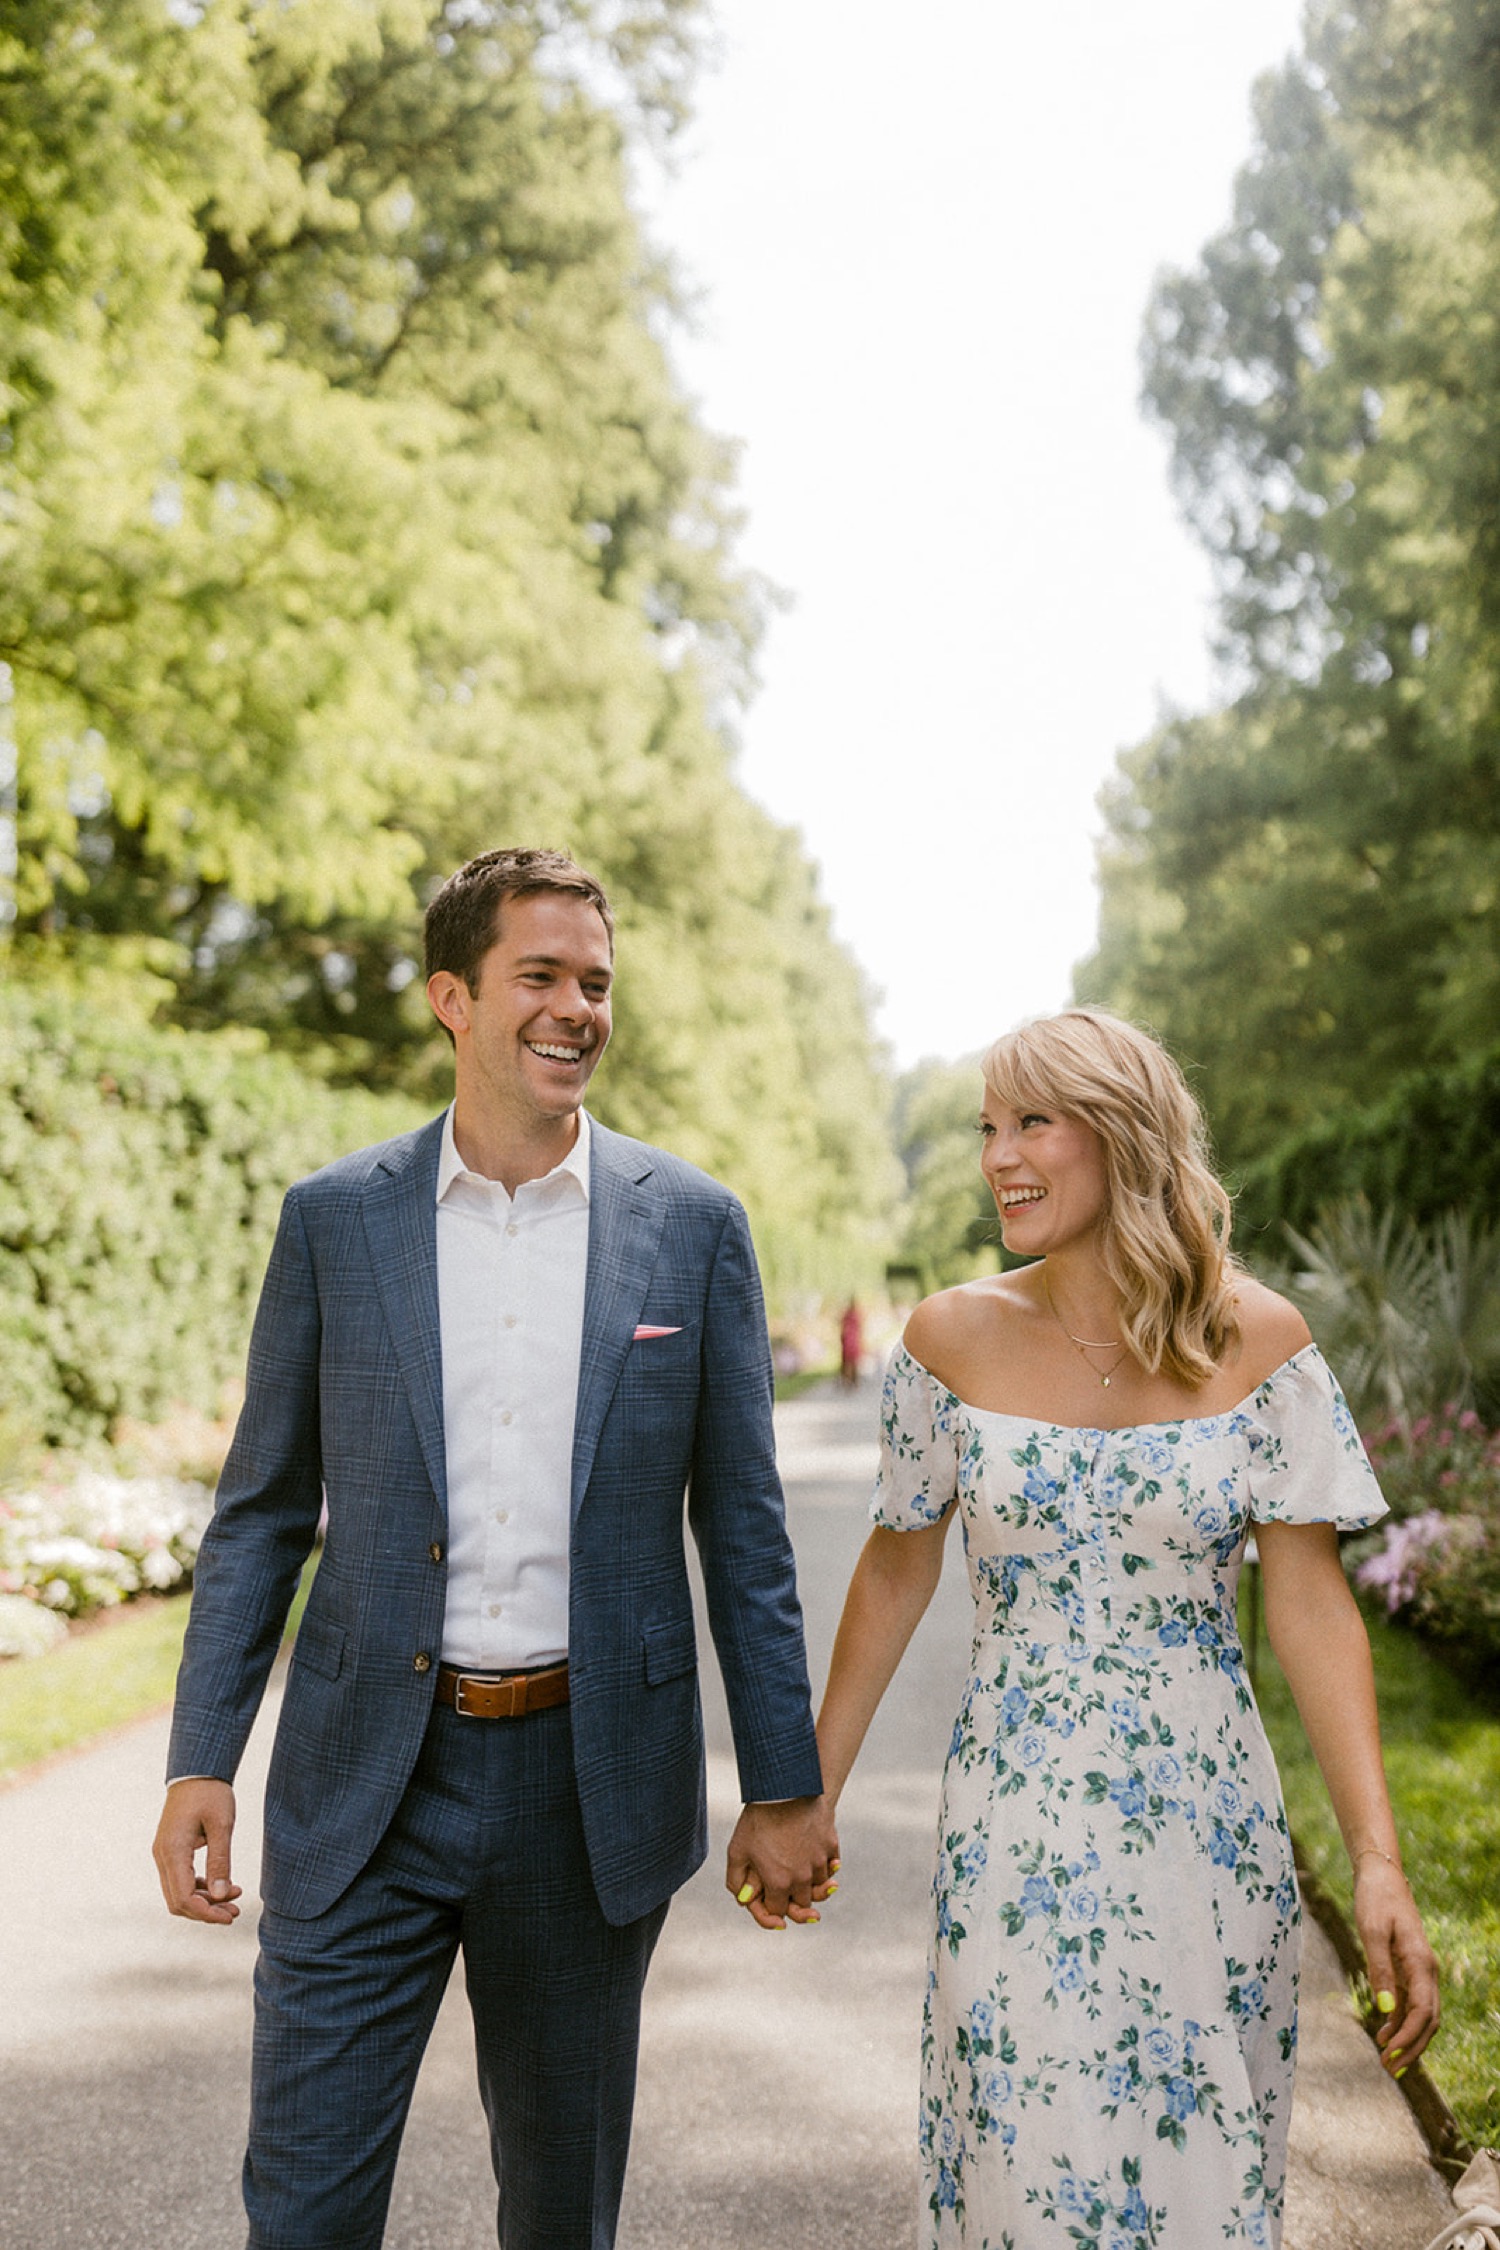 longwood gardens engagement session couple walking on path in park